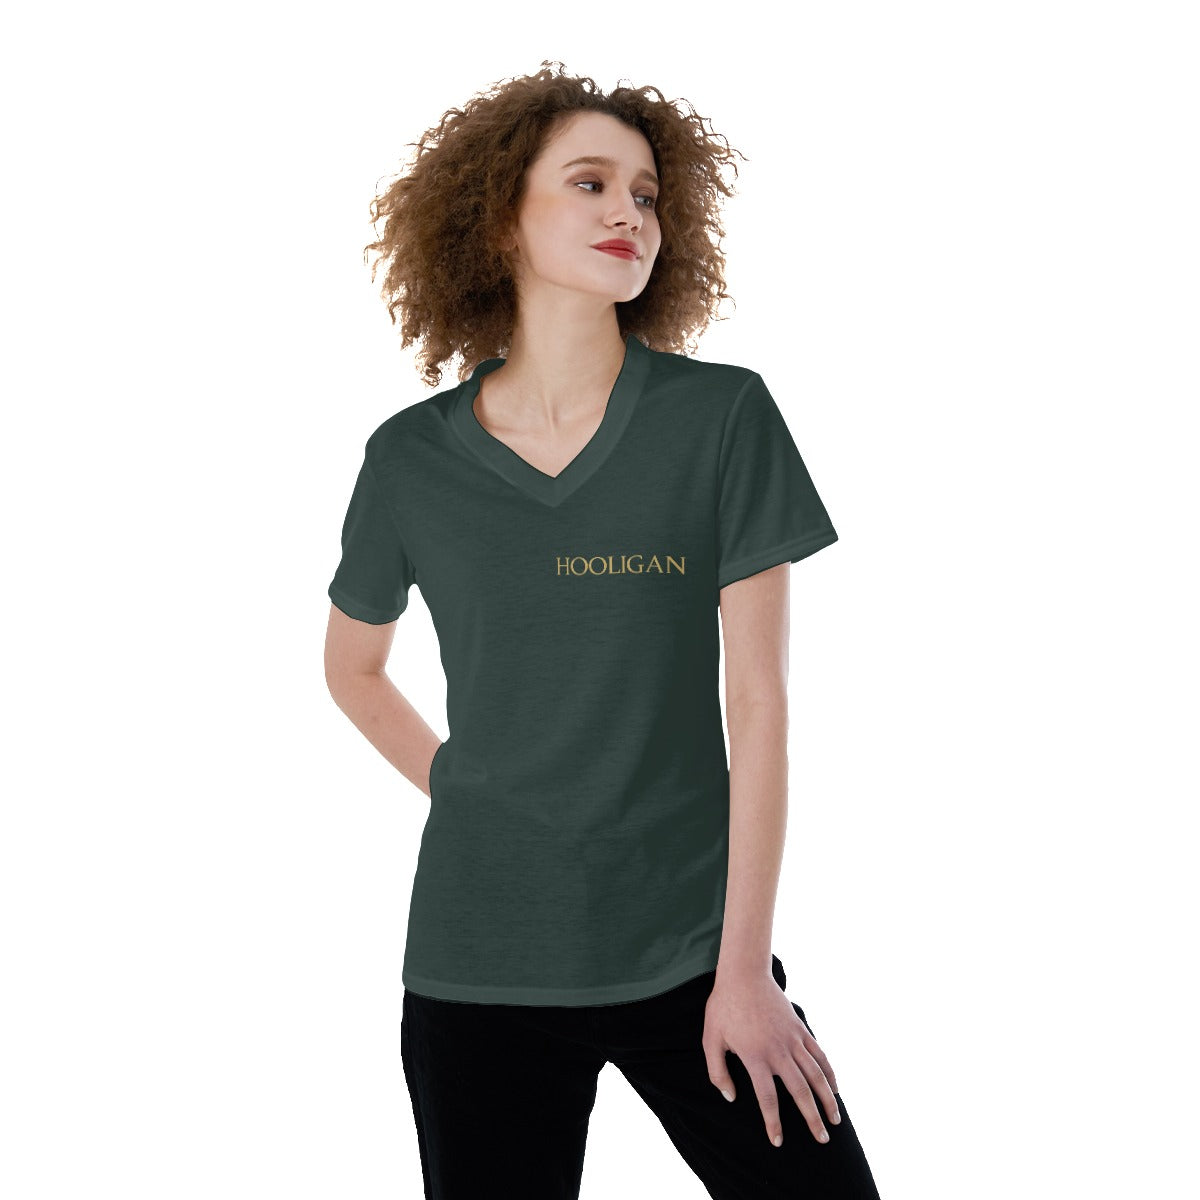 All-Over Print V-neck Women's T-shirt (shipping to USA only)